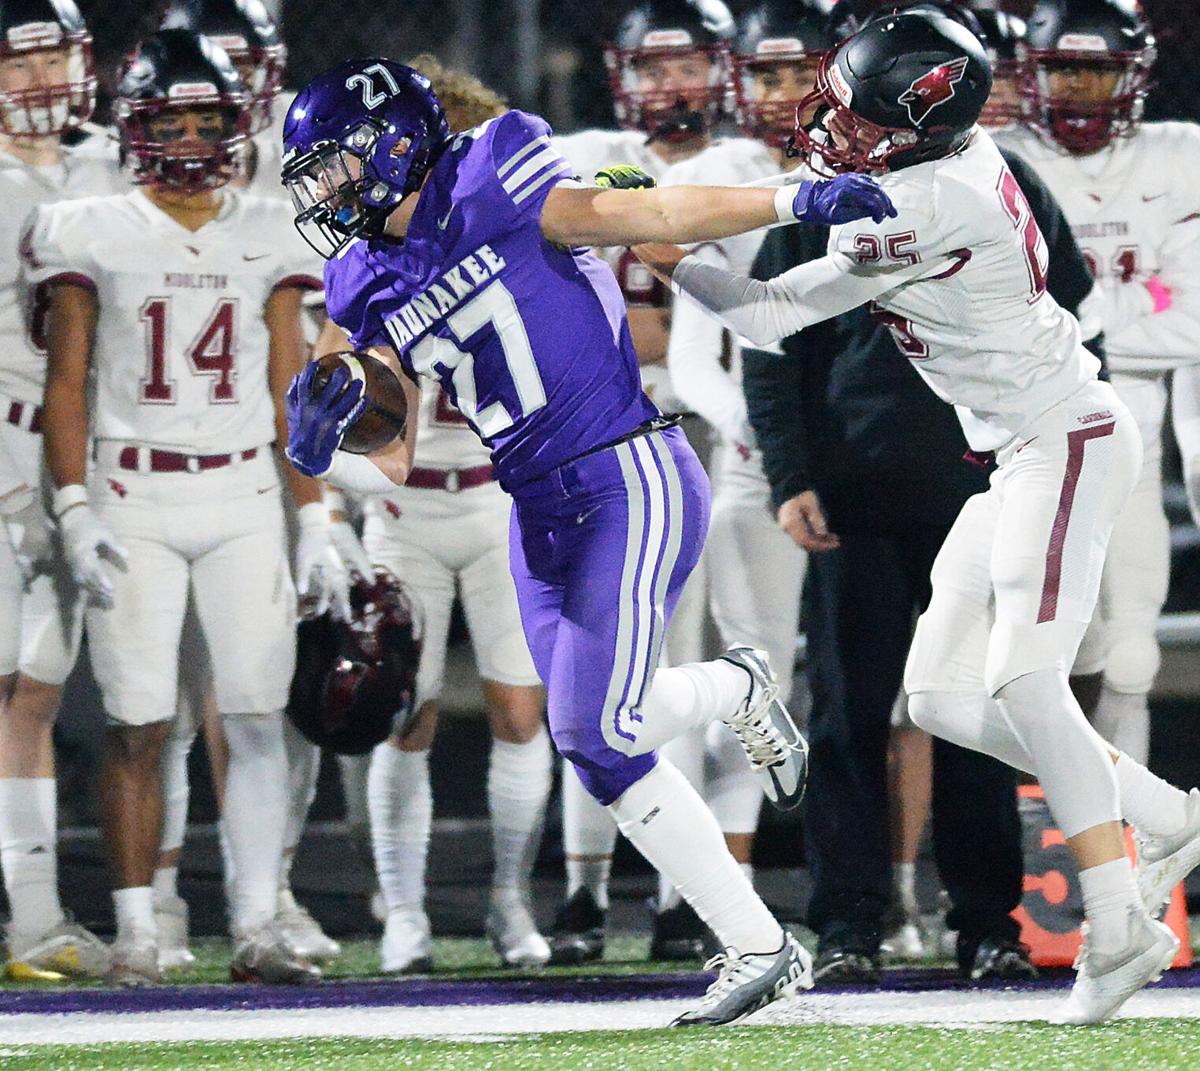 Touchdown in closing seconds sends Waunakee past Middleton in WIAA playoffs